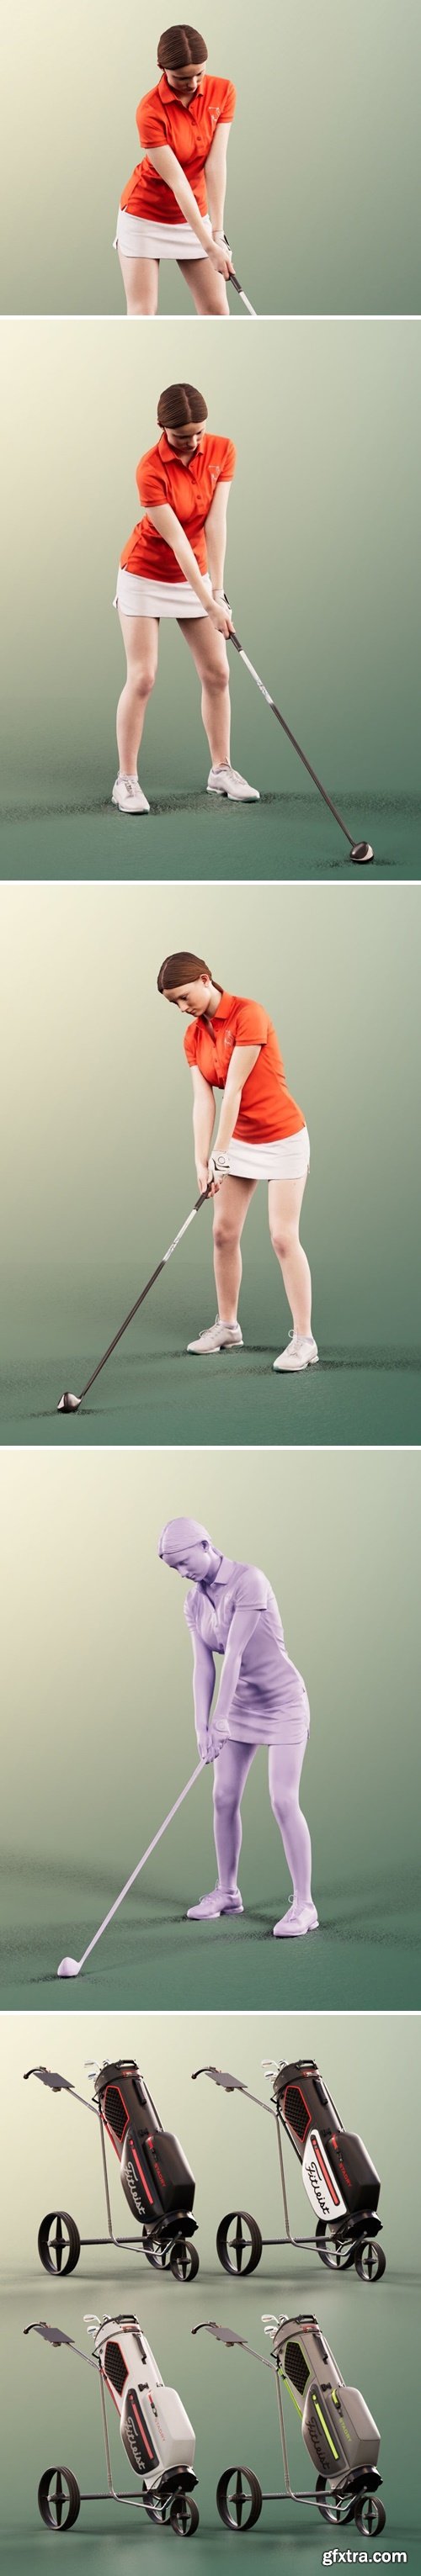 Faye 11813 - Young Golfer Girl Playing Golf With Caddy Cart 3D model